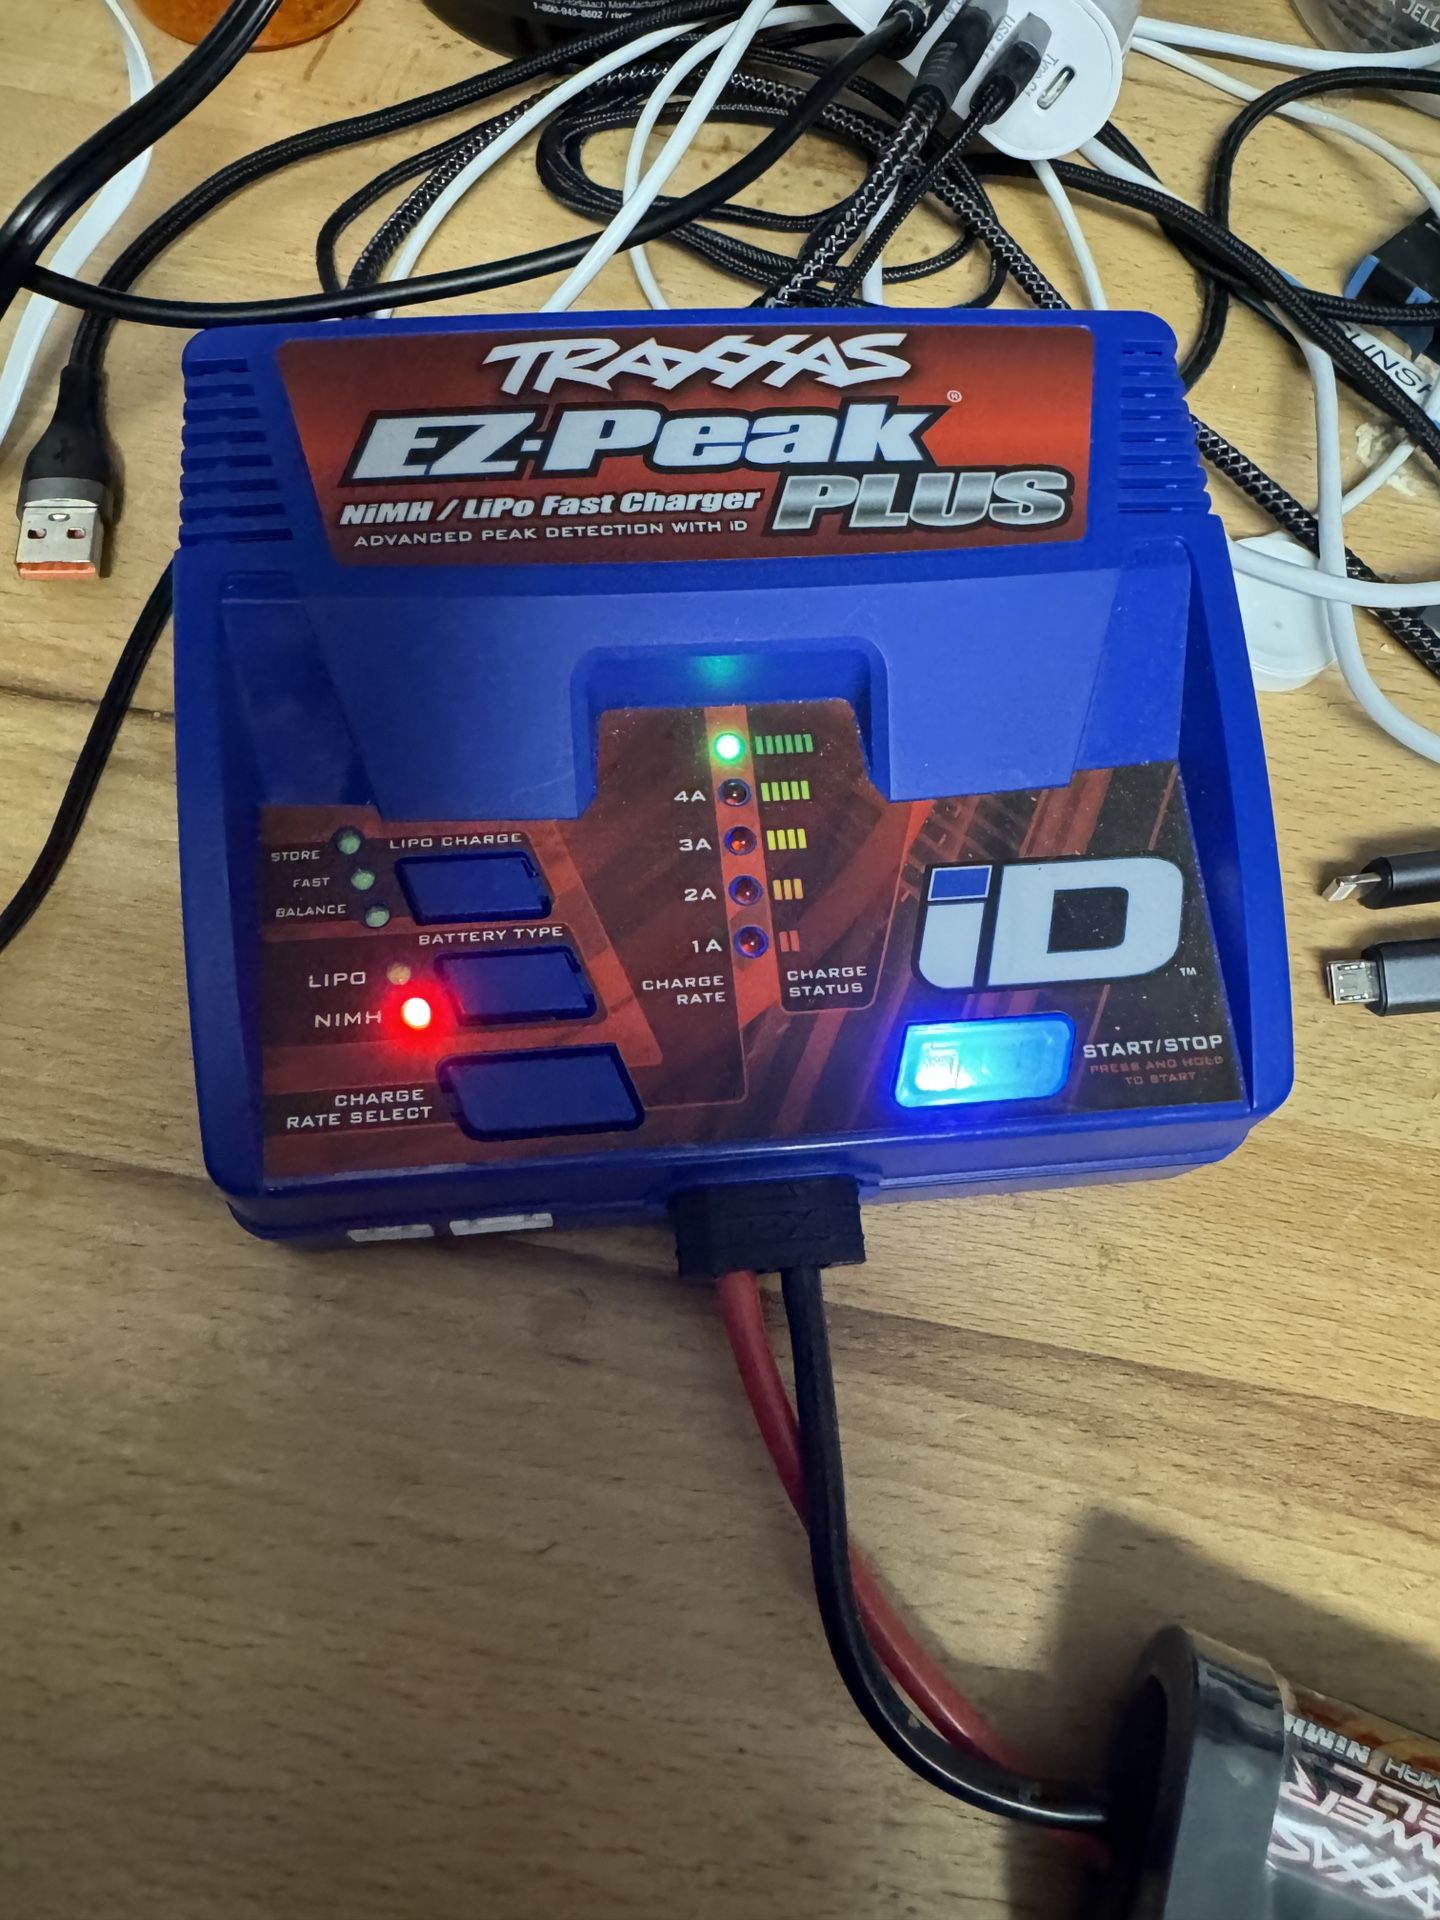 Traxxas ID charger works for lipo or nmh types.